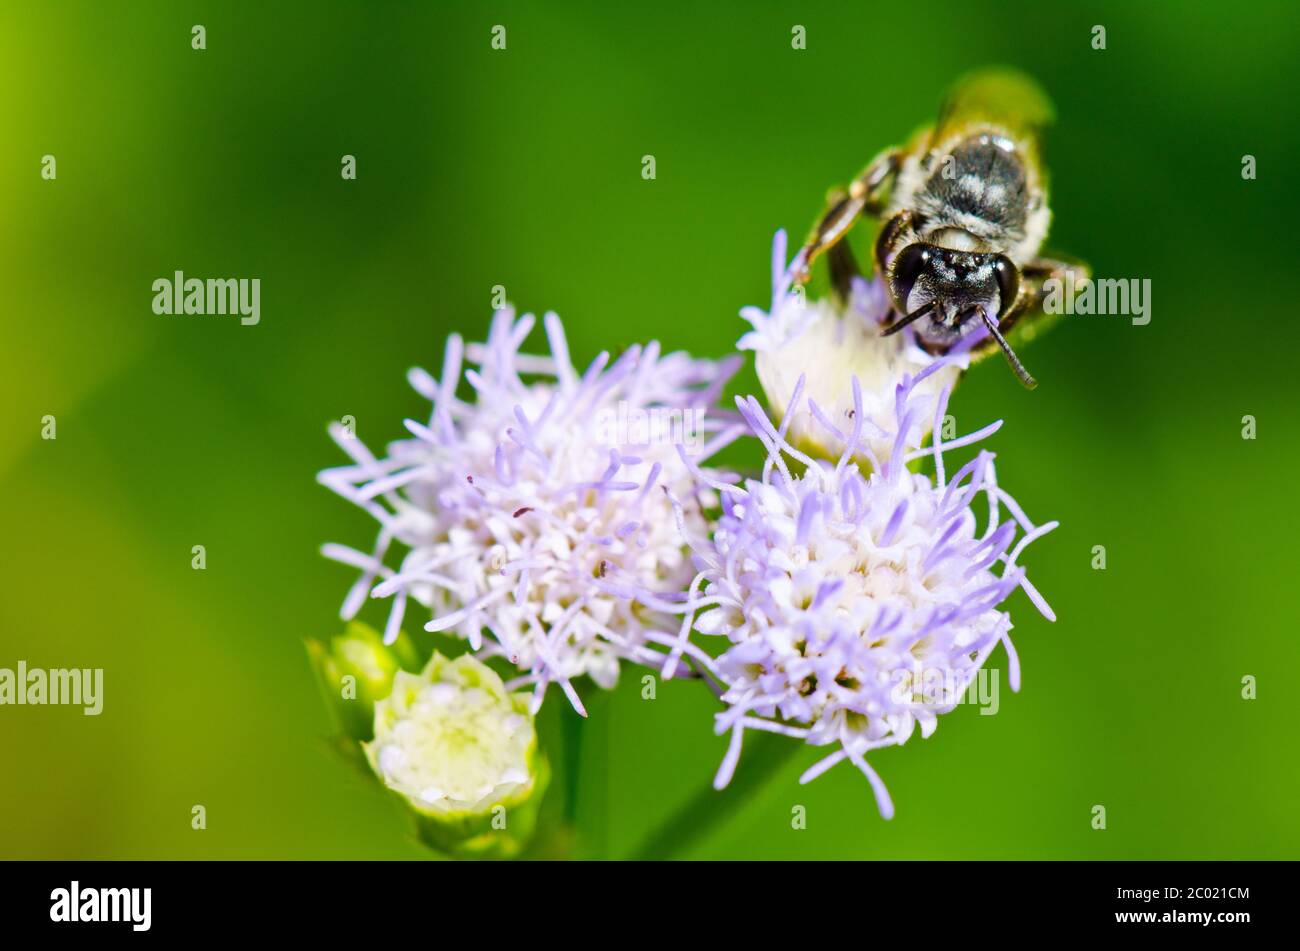 Small bees looking for nectar Stock Photo